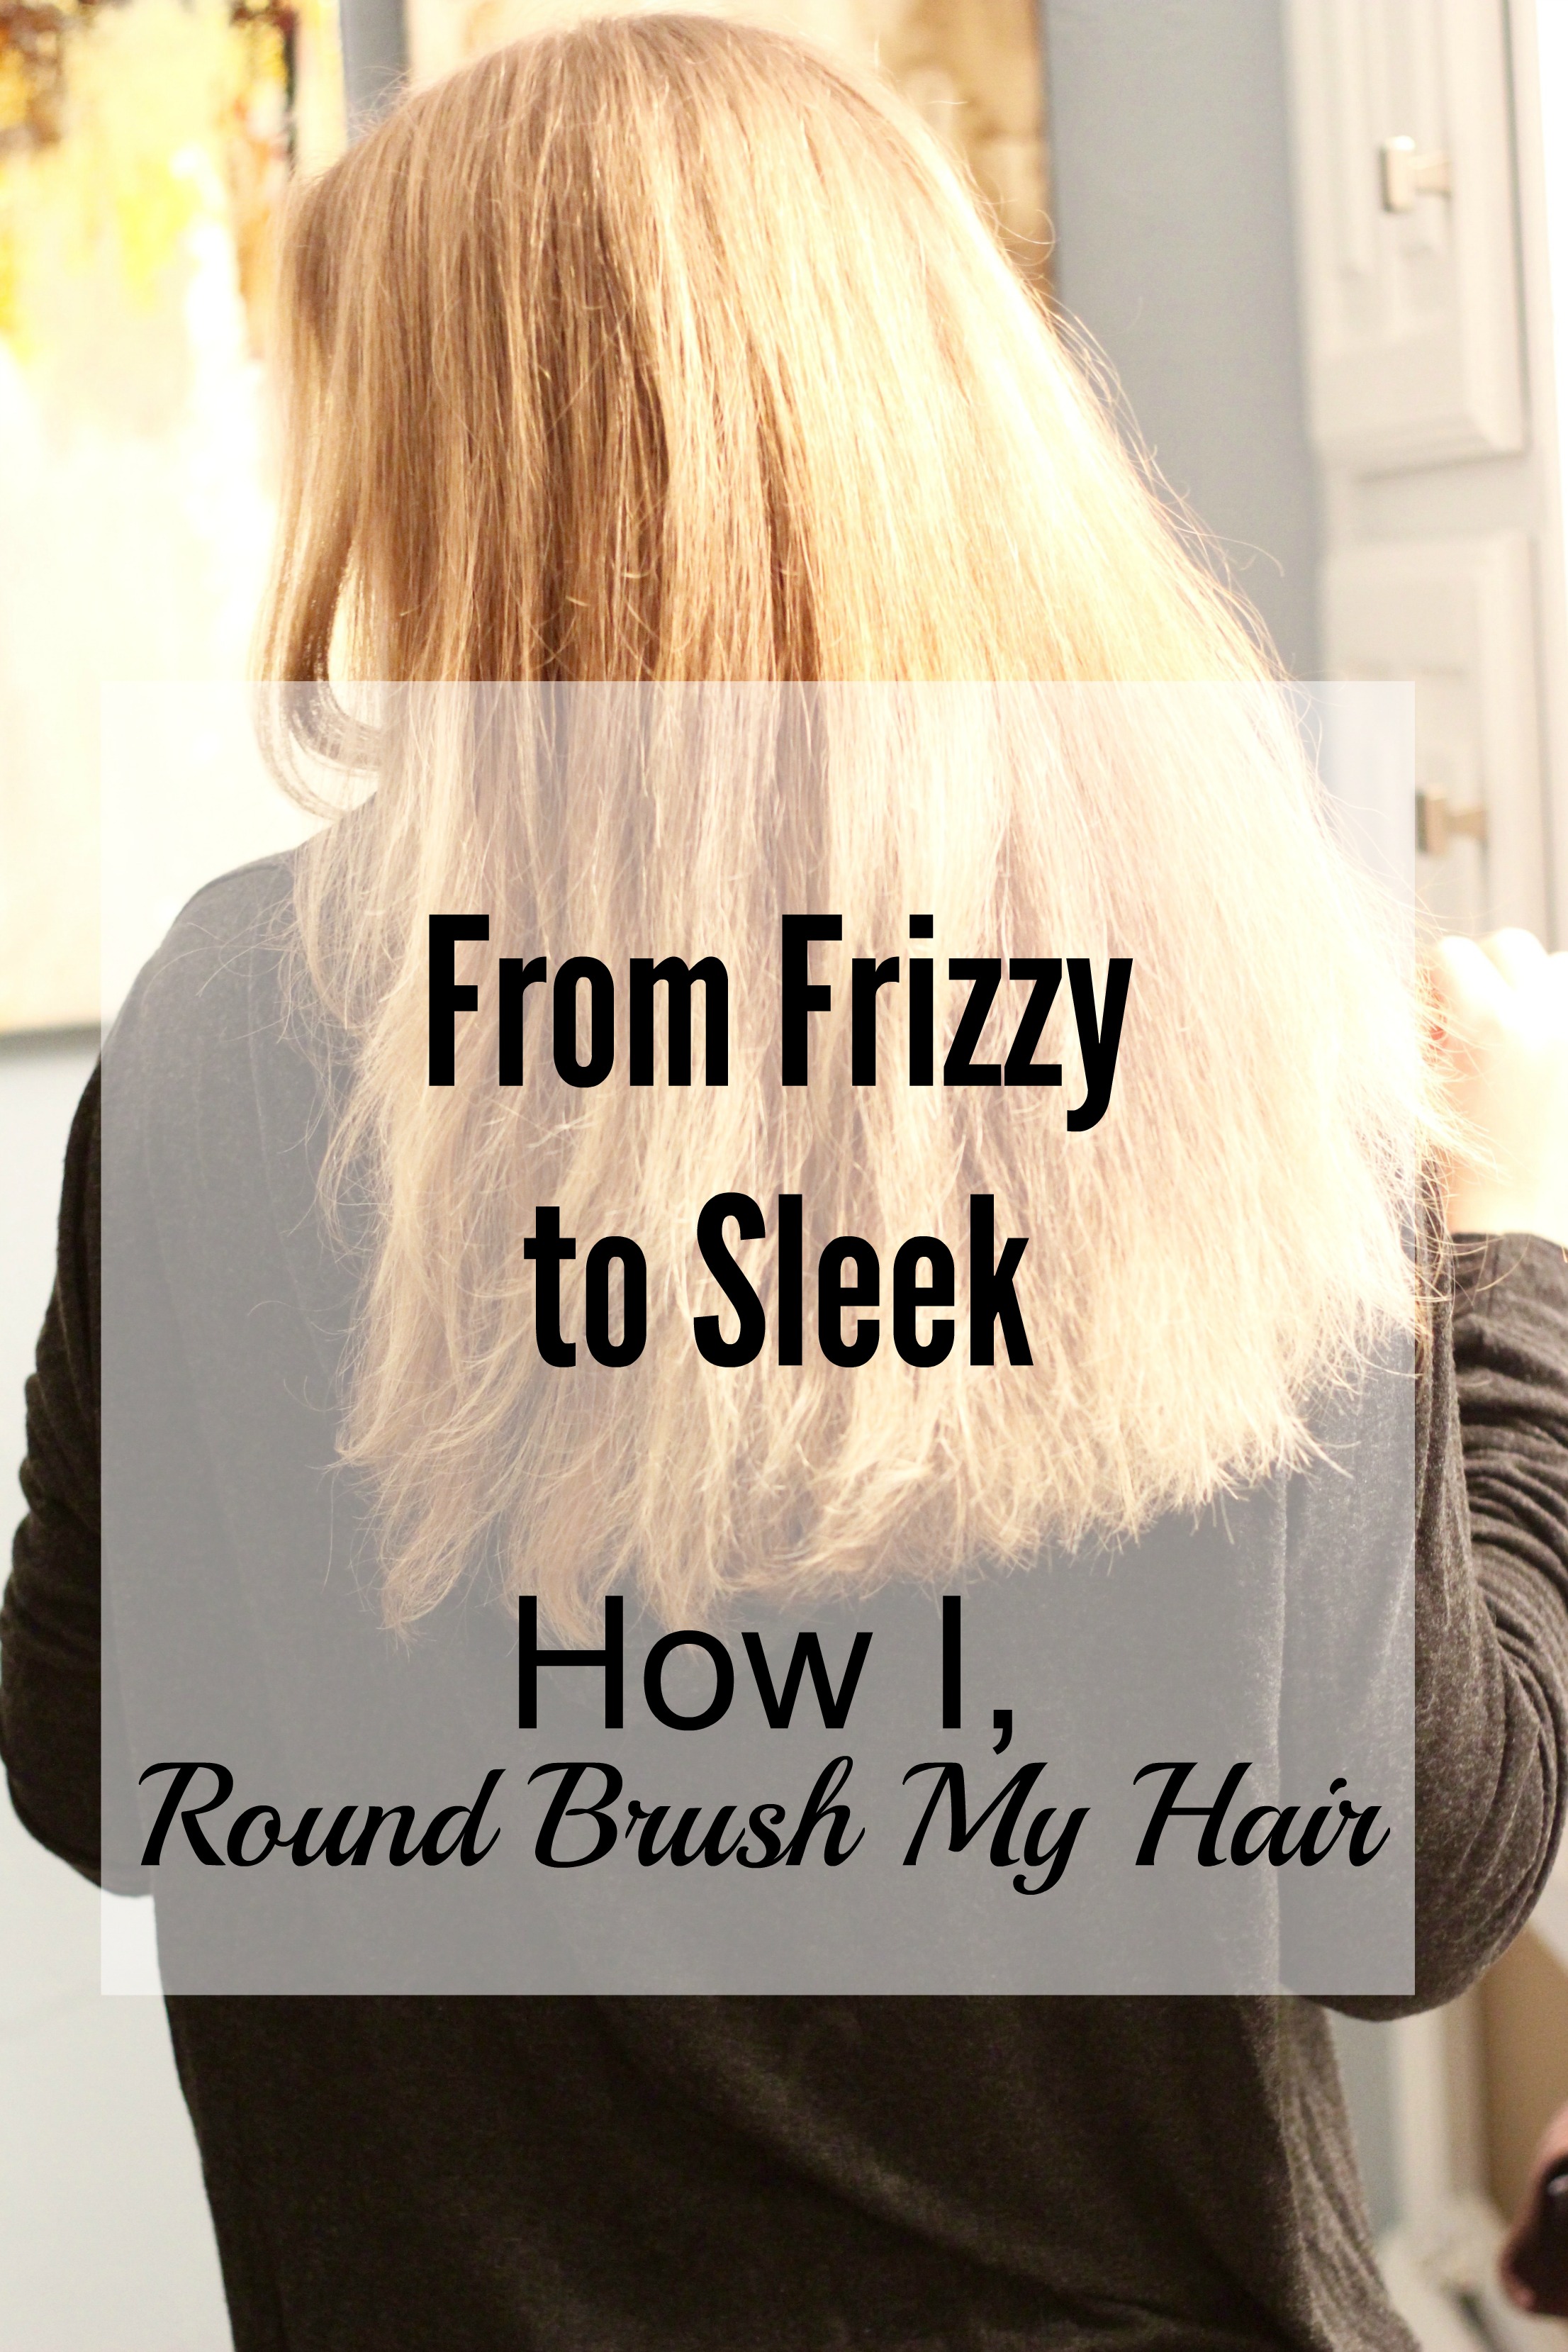 frizzy hair to sleek hair with the blog&go - Round Brush from Frizzy to Sleek Hair by popular Texas style blogger Audrey Madison Stowe